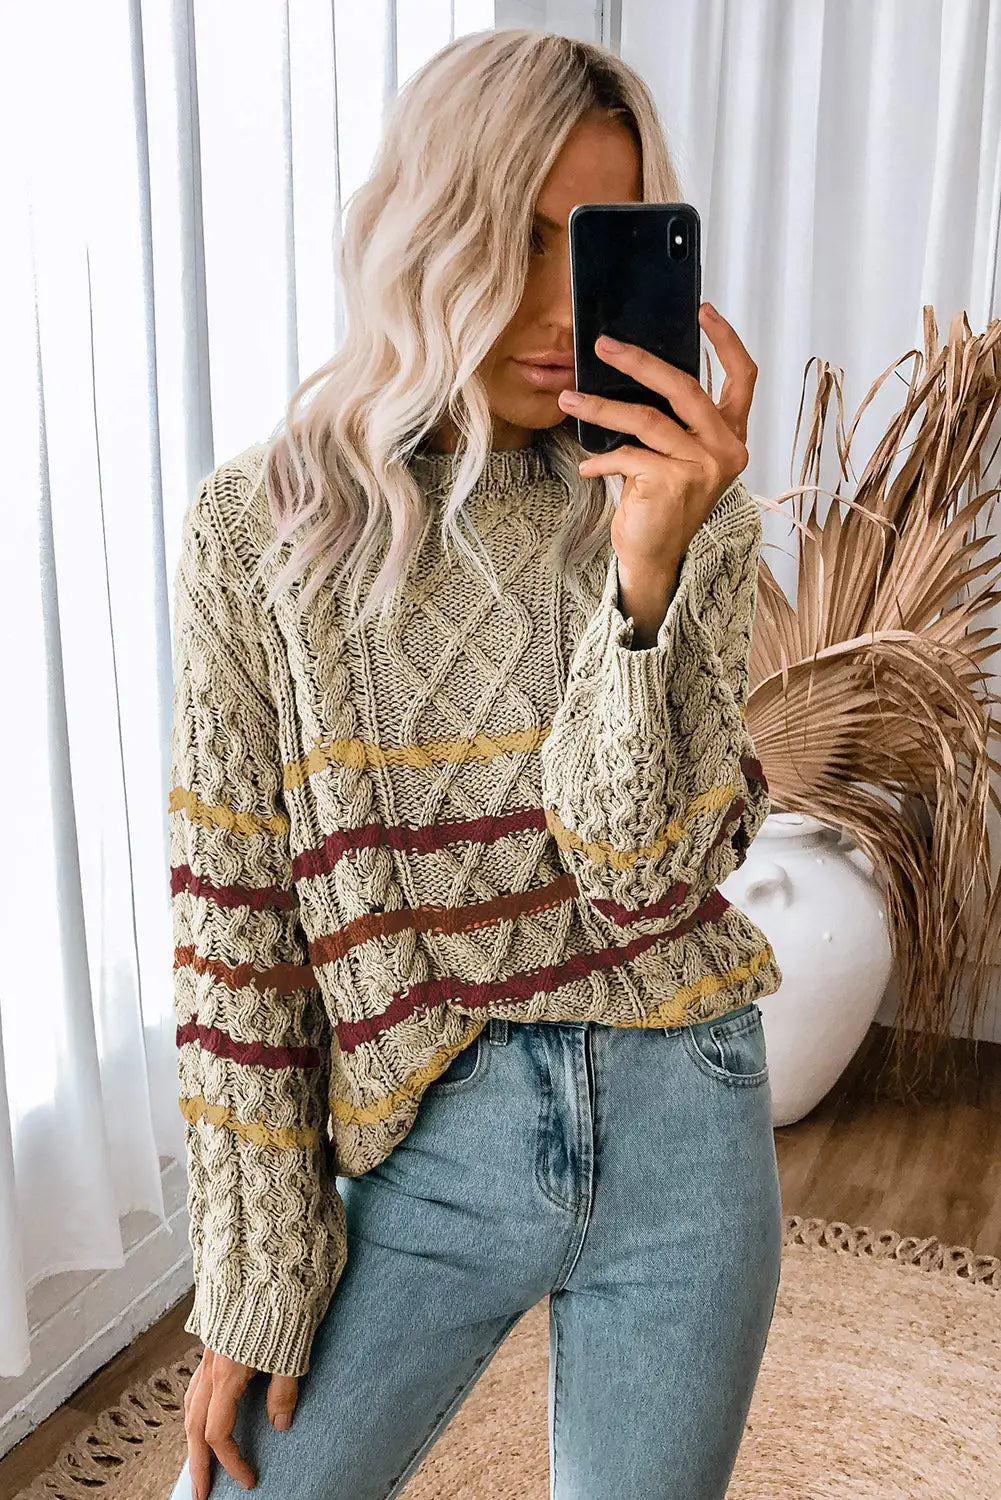 Green striped color block textured knit pullover sweater - sweaters & cardigans